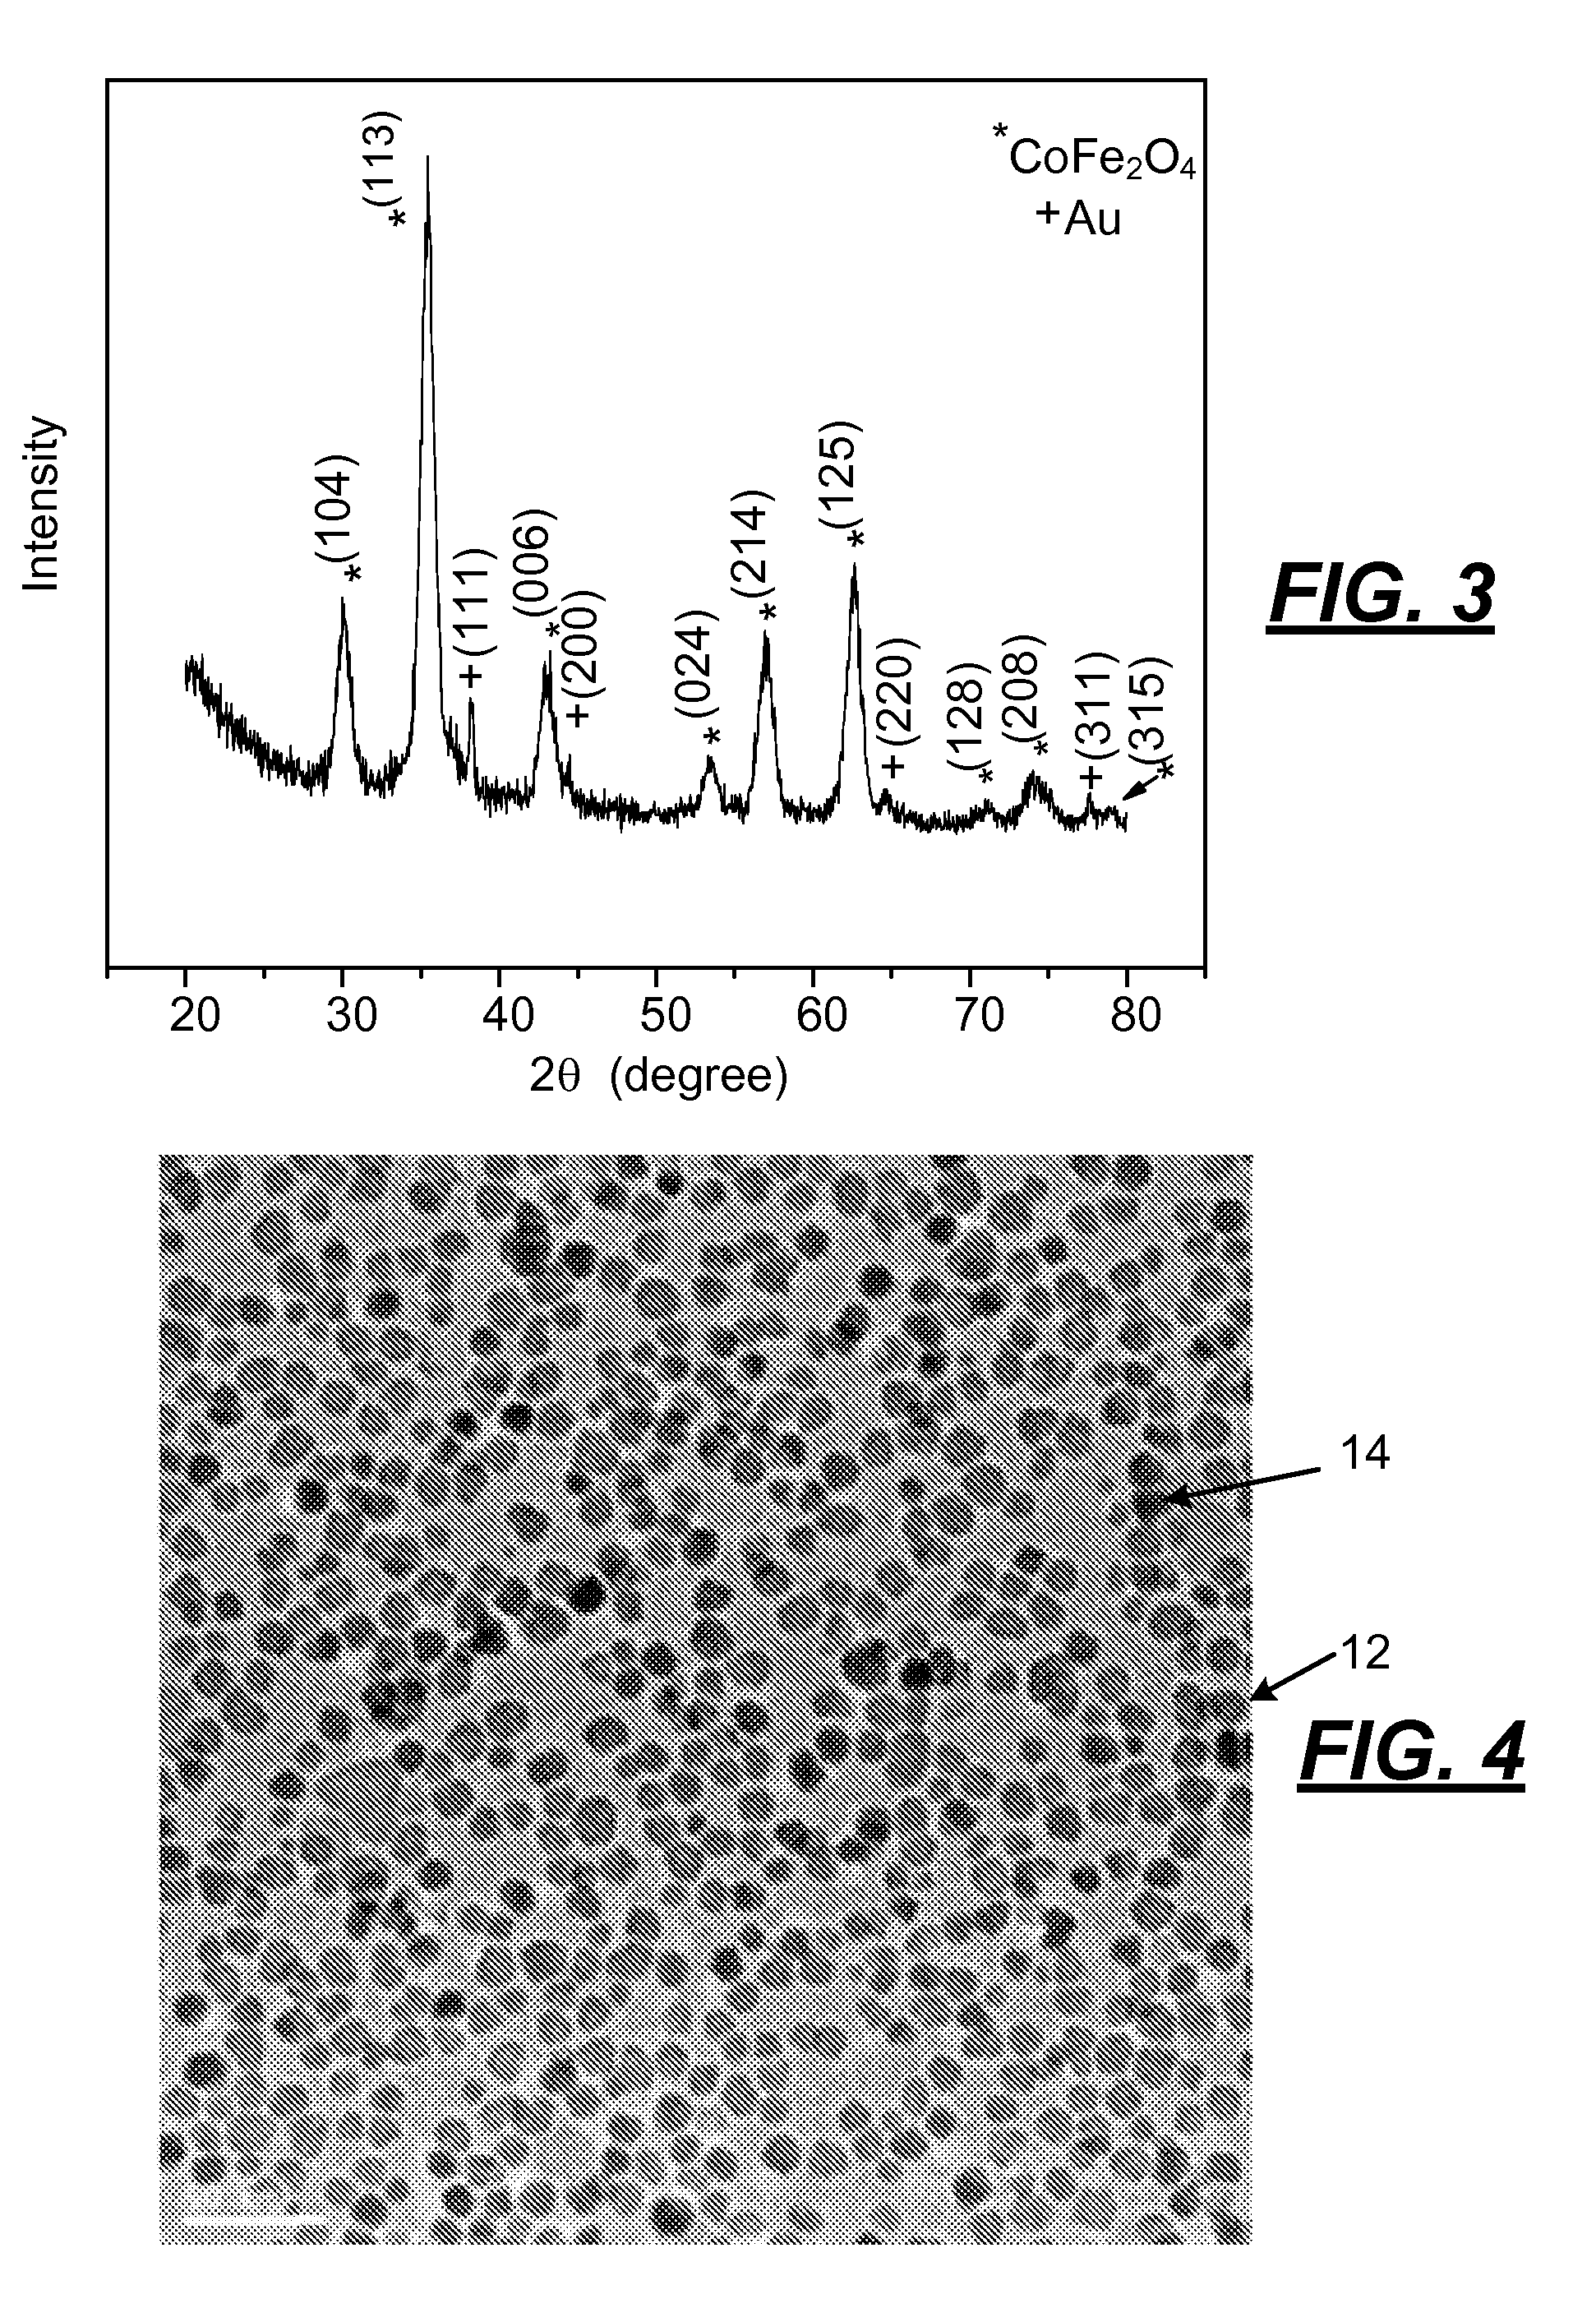 Nanoparticle additives and lubricant formulations containing the nanoparticle additives